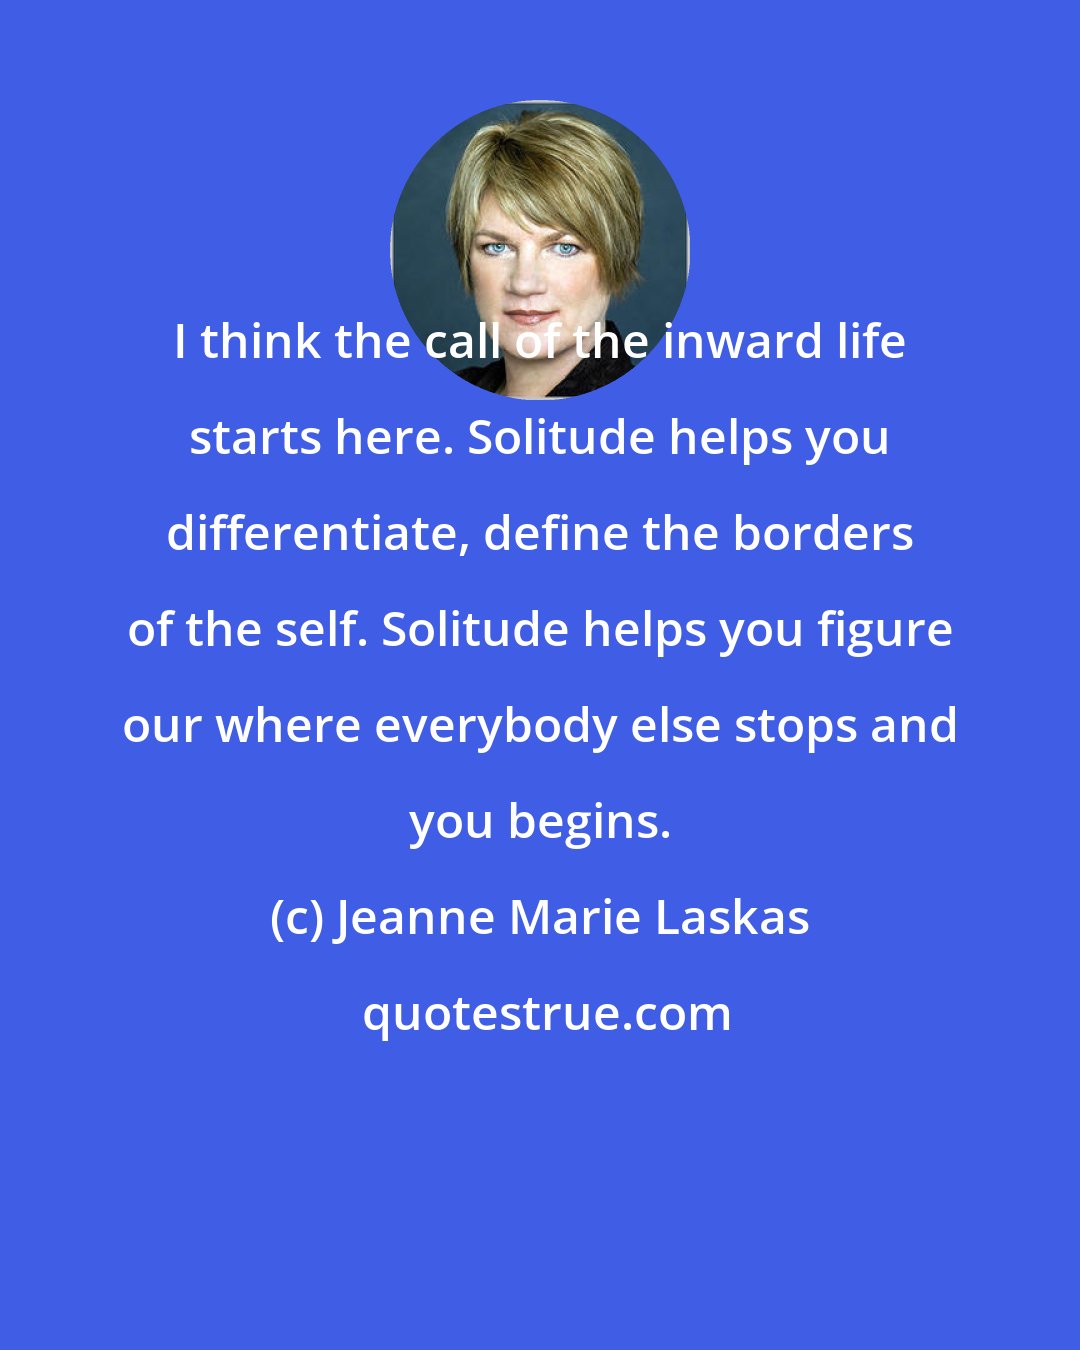 Jeanne Marie Laskas: I think the call of the inward life starts here. Solitude helps you differentiate, define the borders of the self. Solitude helps you figure our where everybody else stops and you begins.